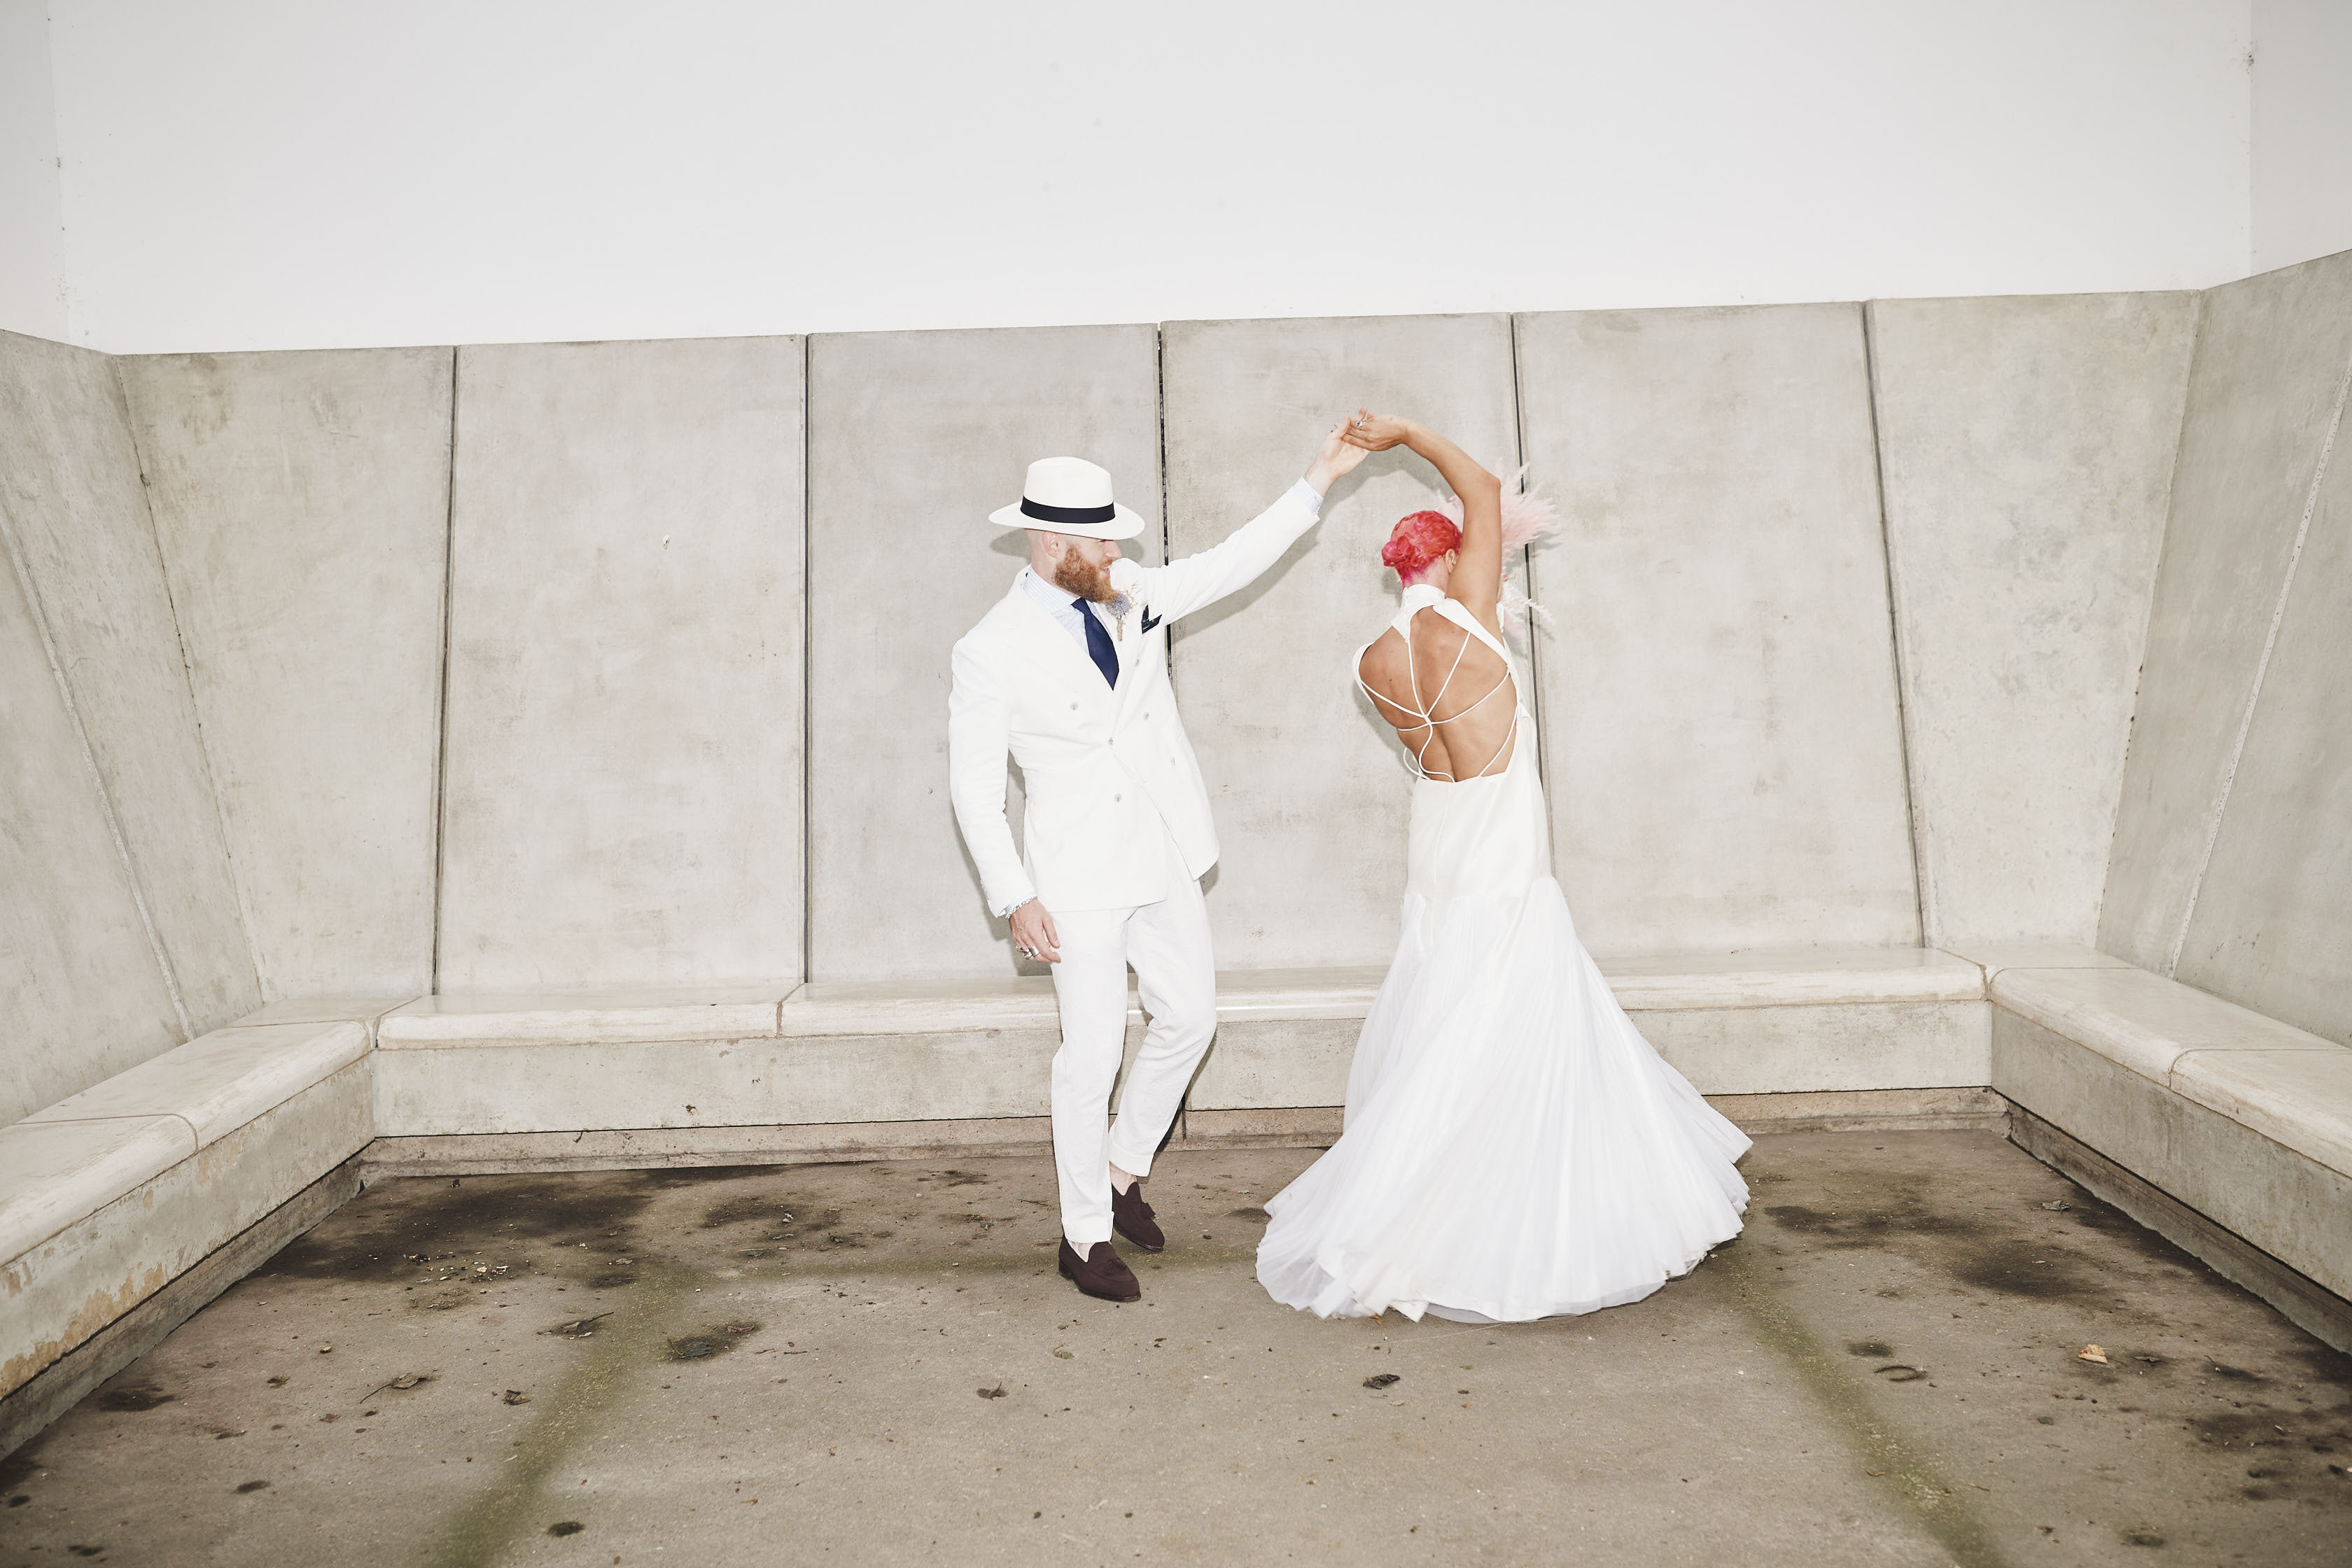 A bride and groom, wearing a long white dress and white suit, dancing inside a small room with concrete seating.